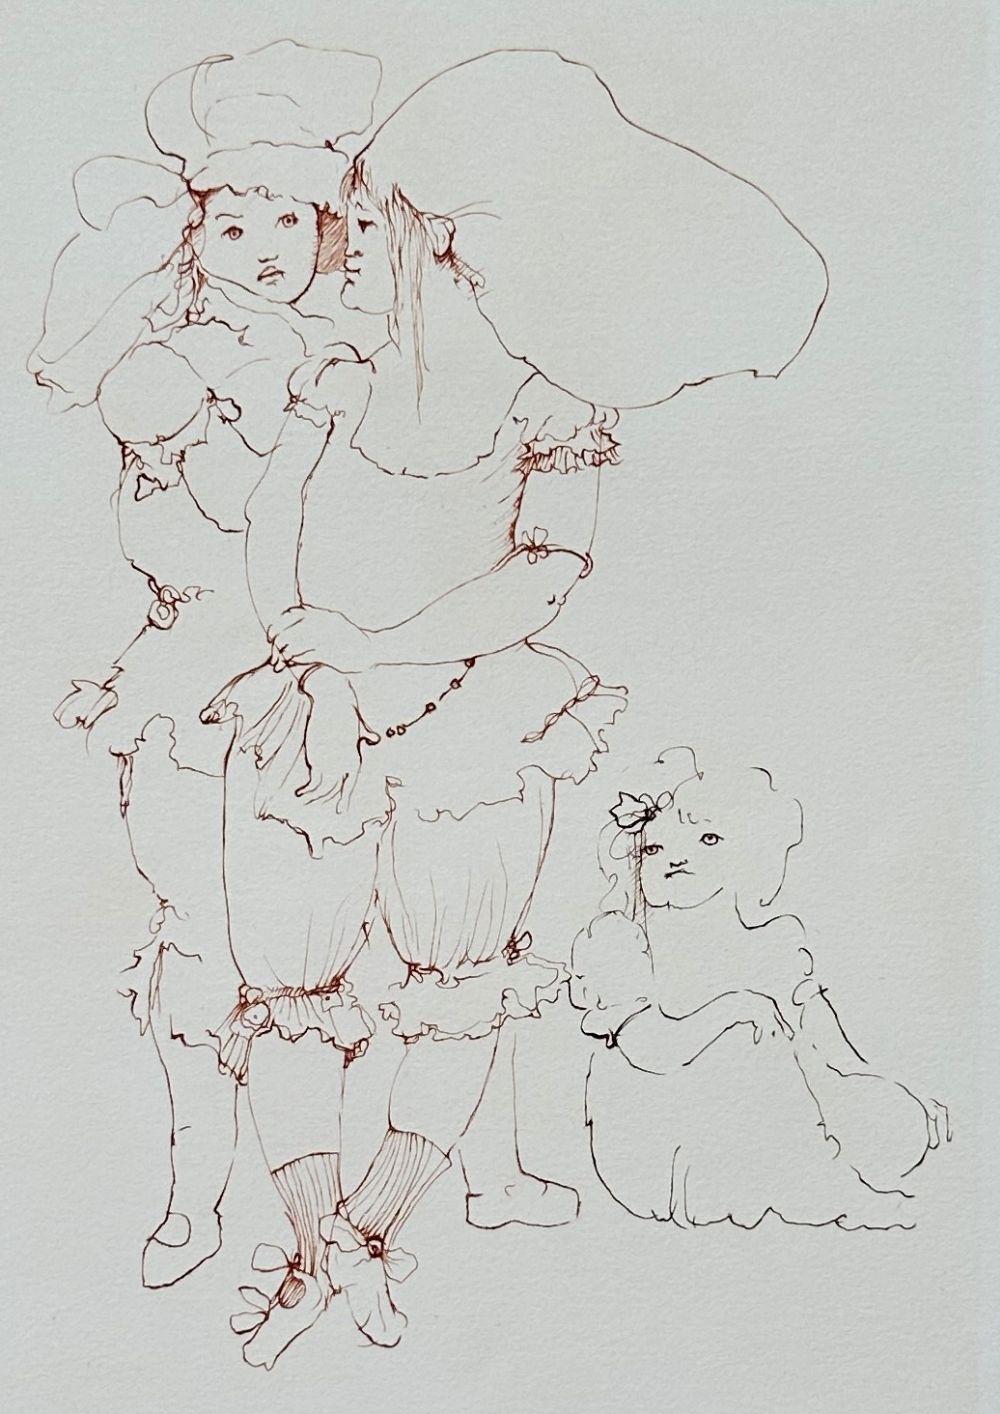 Family Portrait - Original Etching Hand Signed & Numbered - Surrealist Print by Leonor Fini